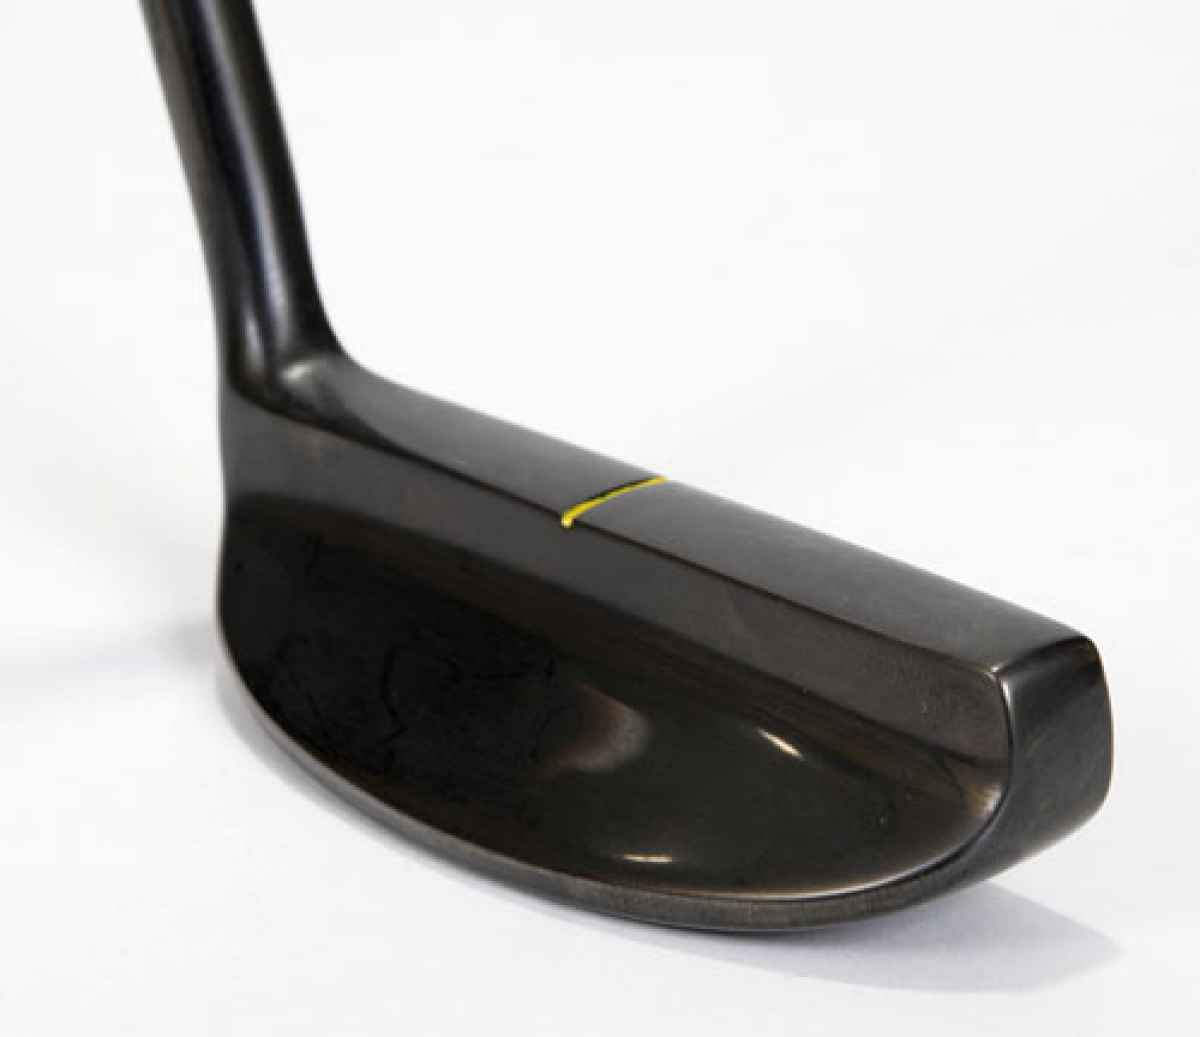 Blade putters back in vogue